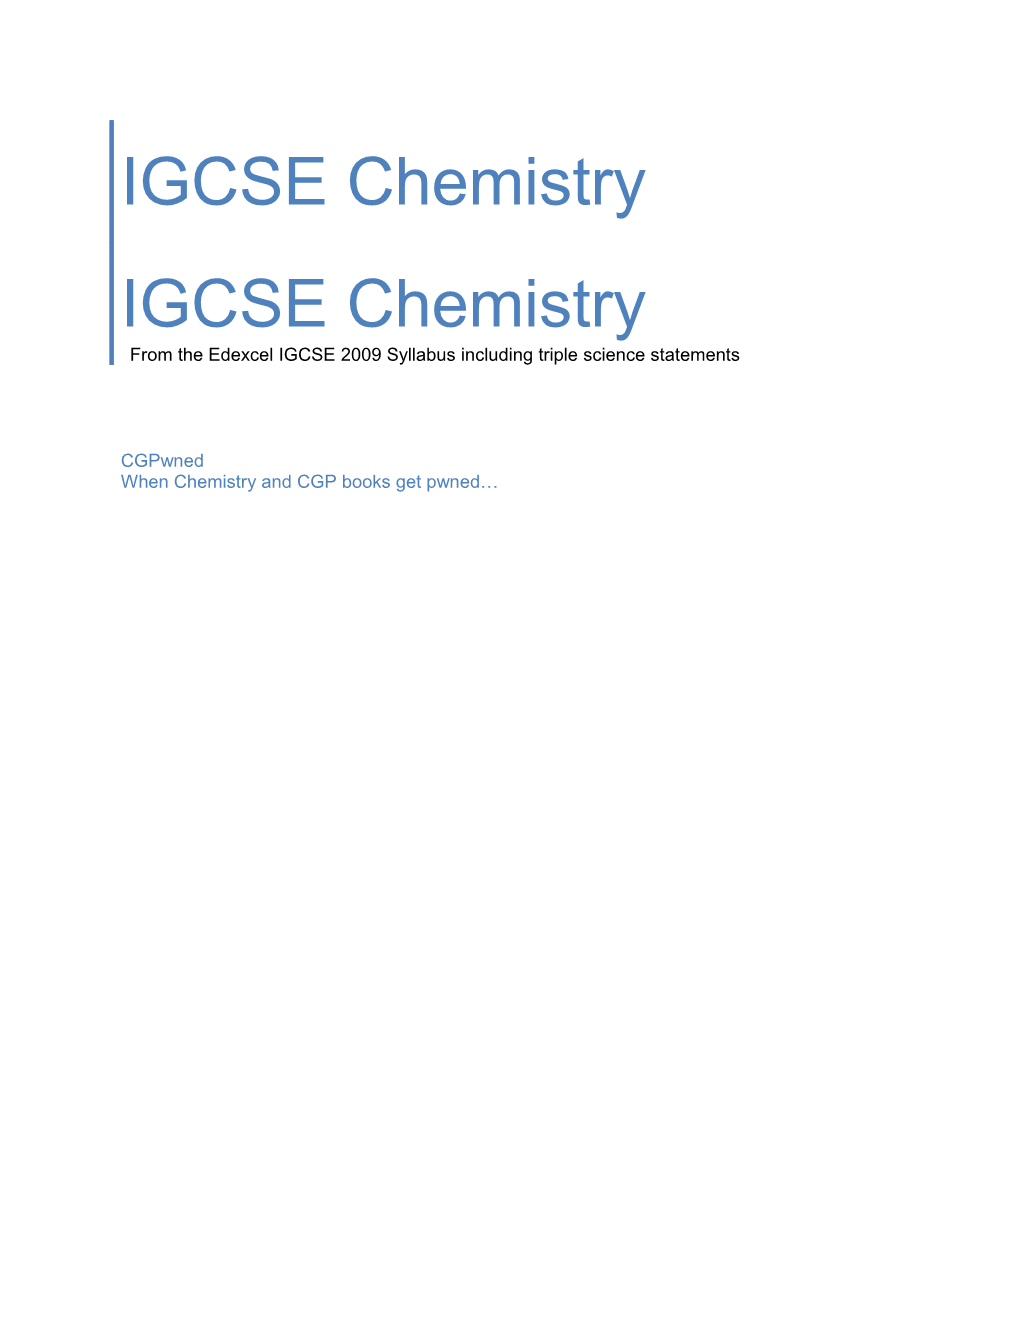 From the Edexcel IGCSE 2009 Syllabus Including Triple Science Statements